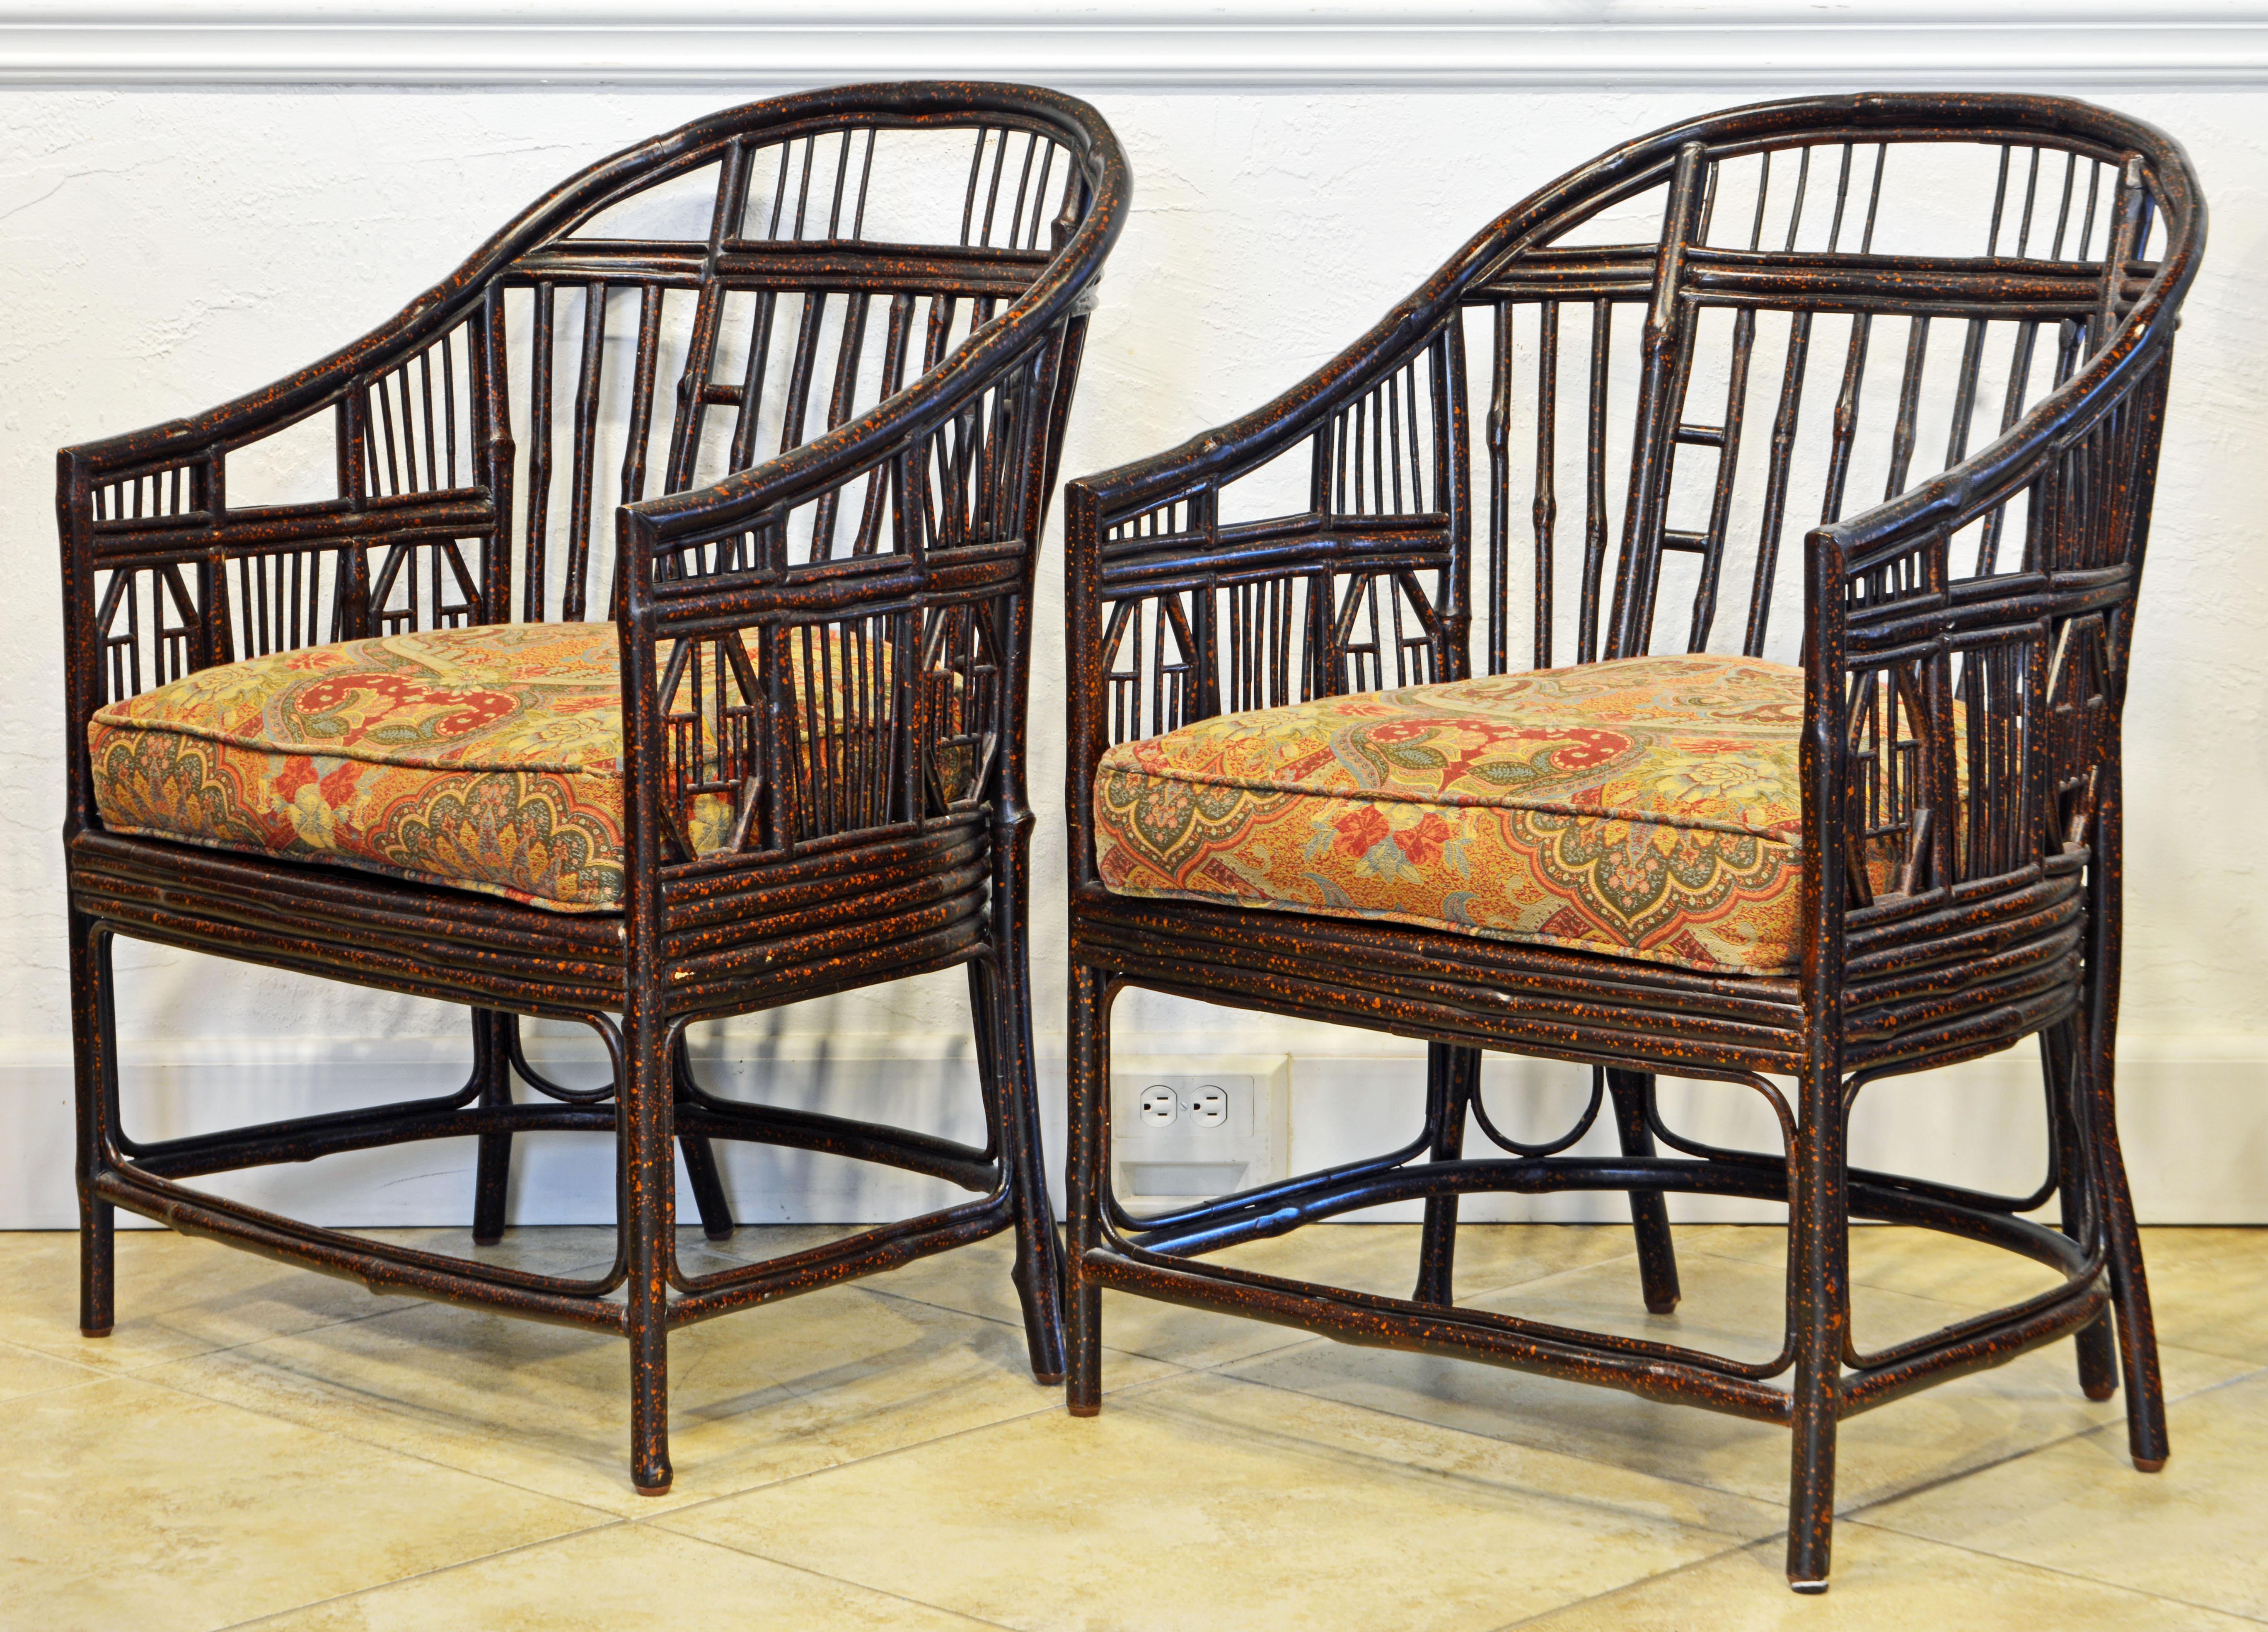 Fabric Pair of Brighton Pavillion, Chinoiserie Lacquered Bamboo Chairs, 20th Century